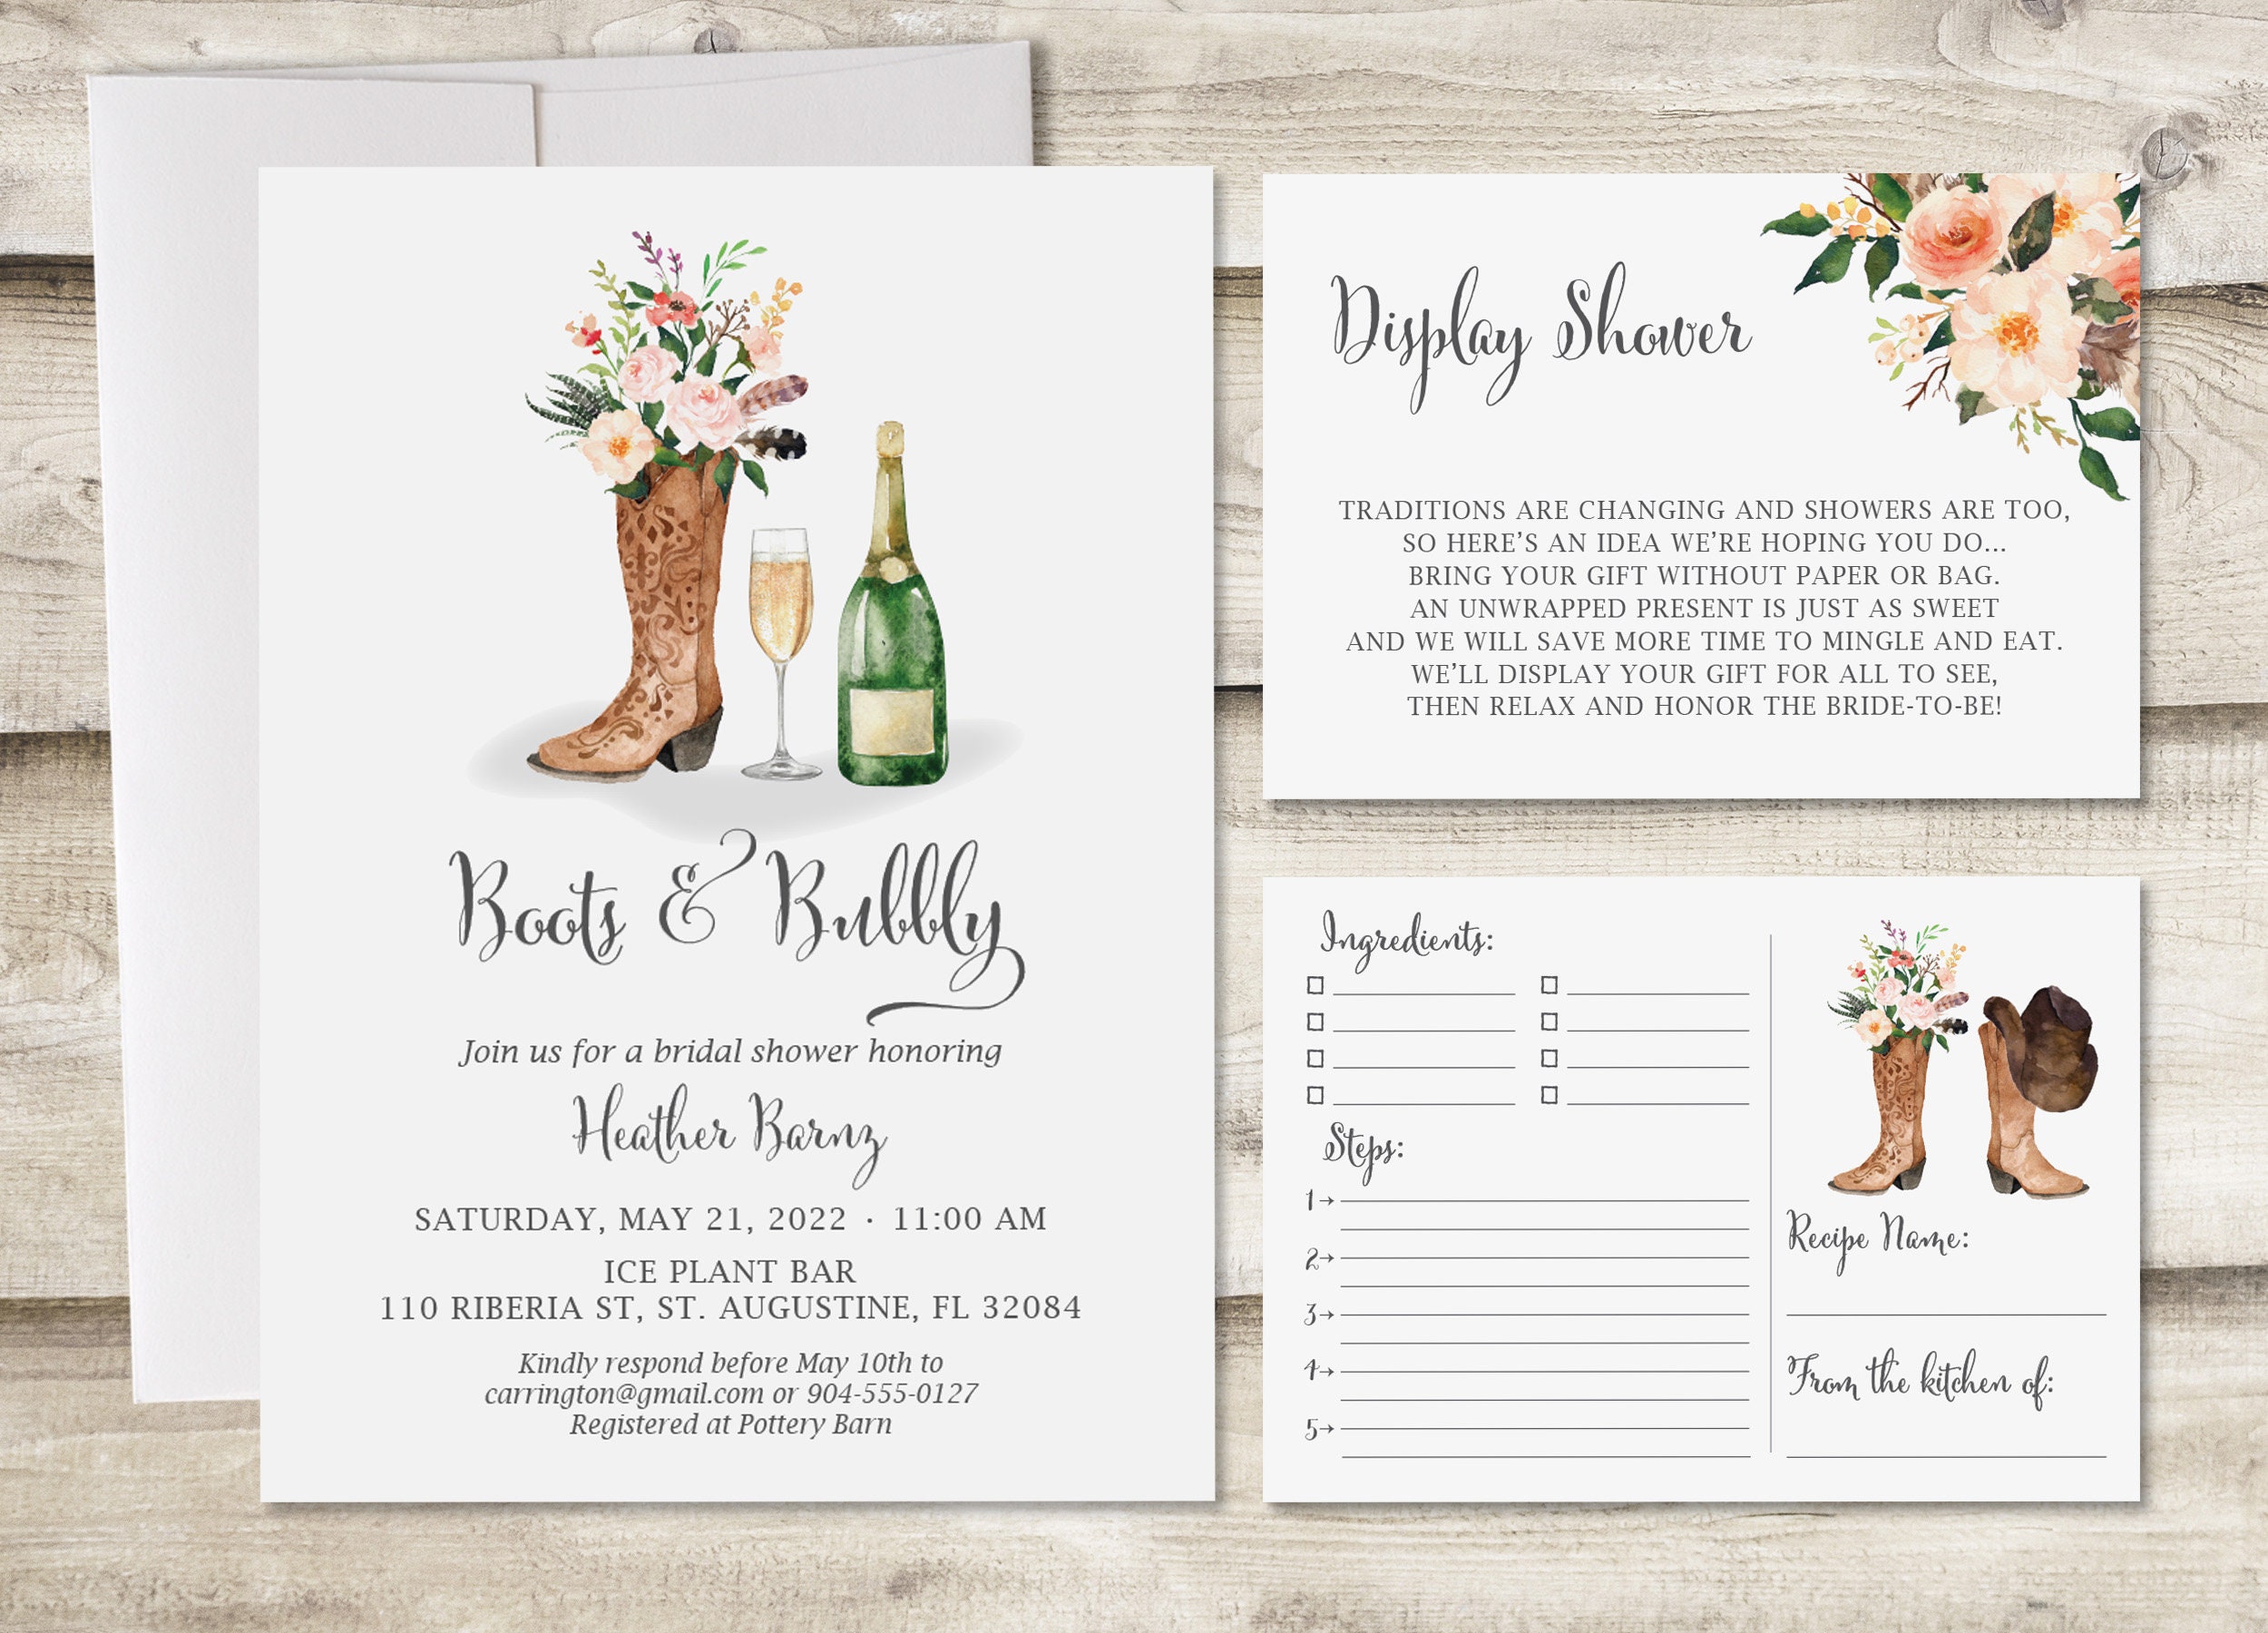 Boots and Bubbly Bridal Shower Invitation With Display Shower